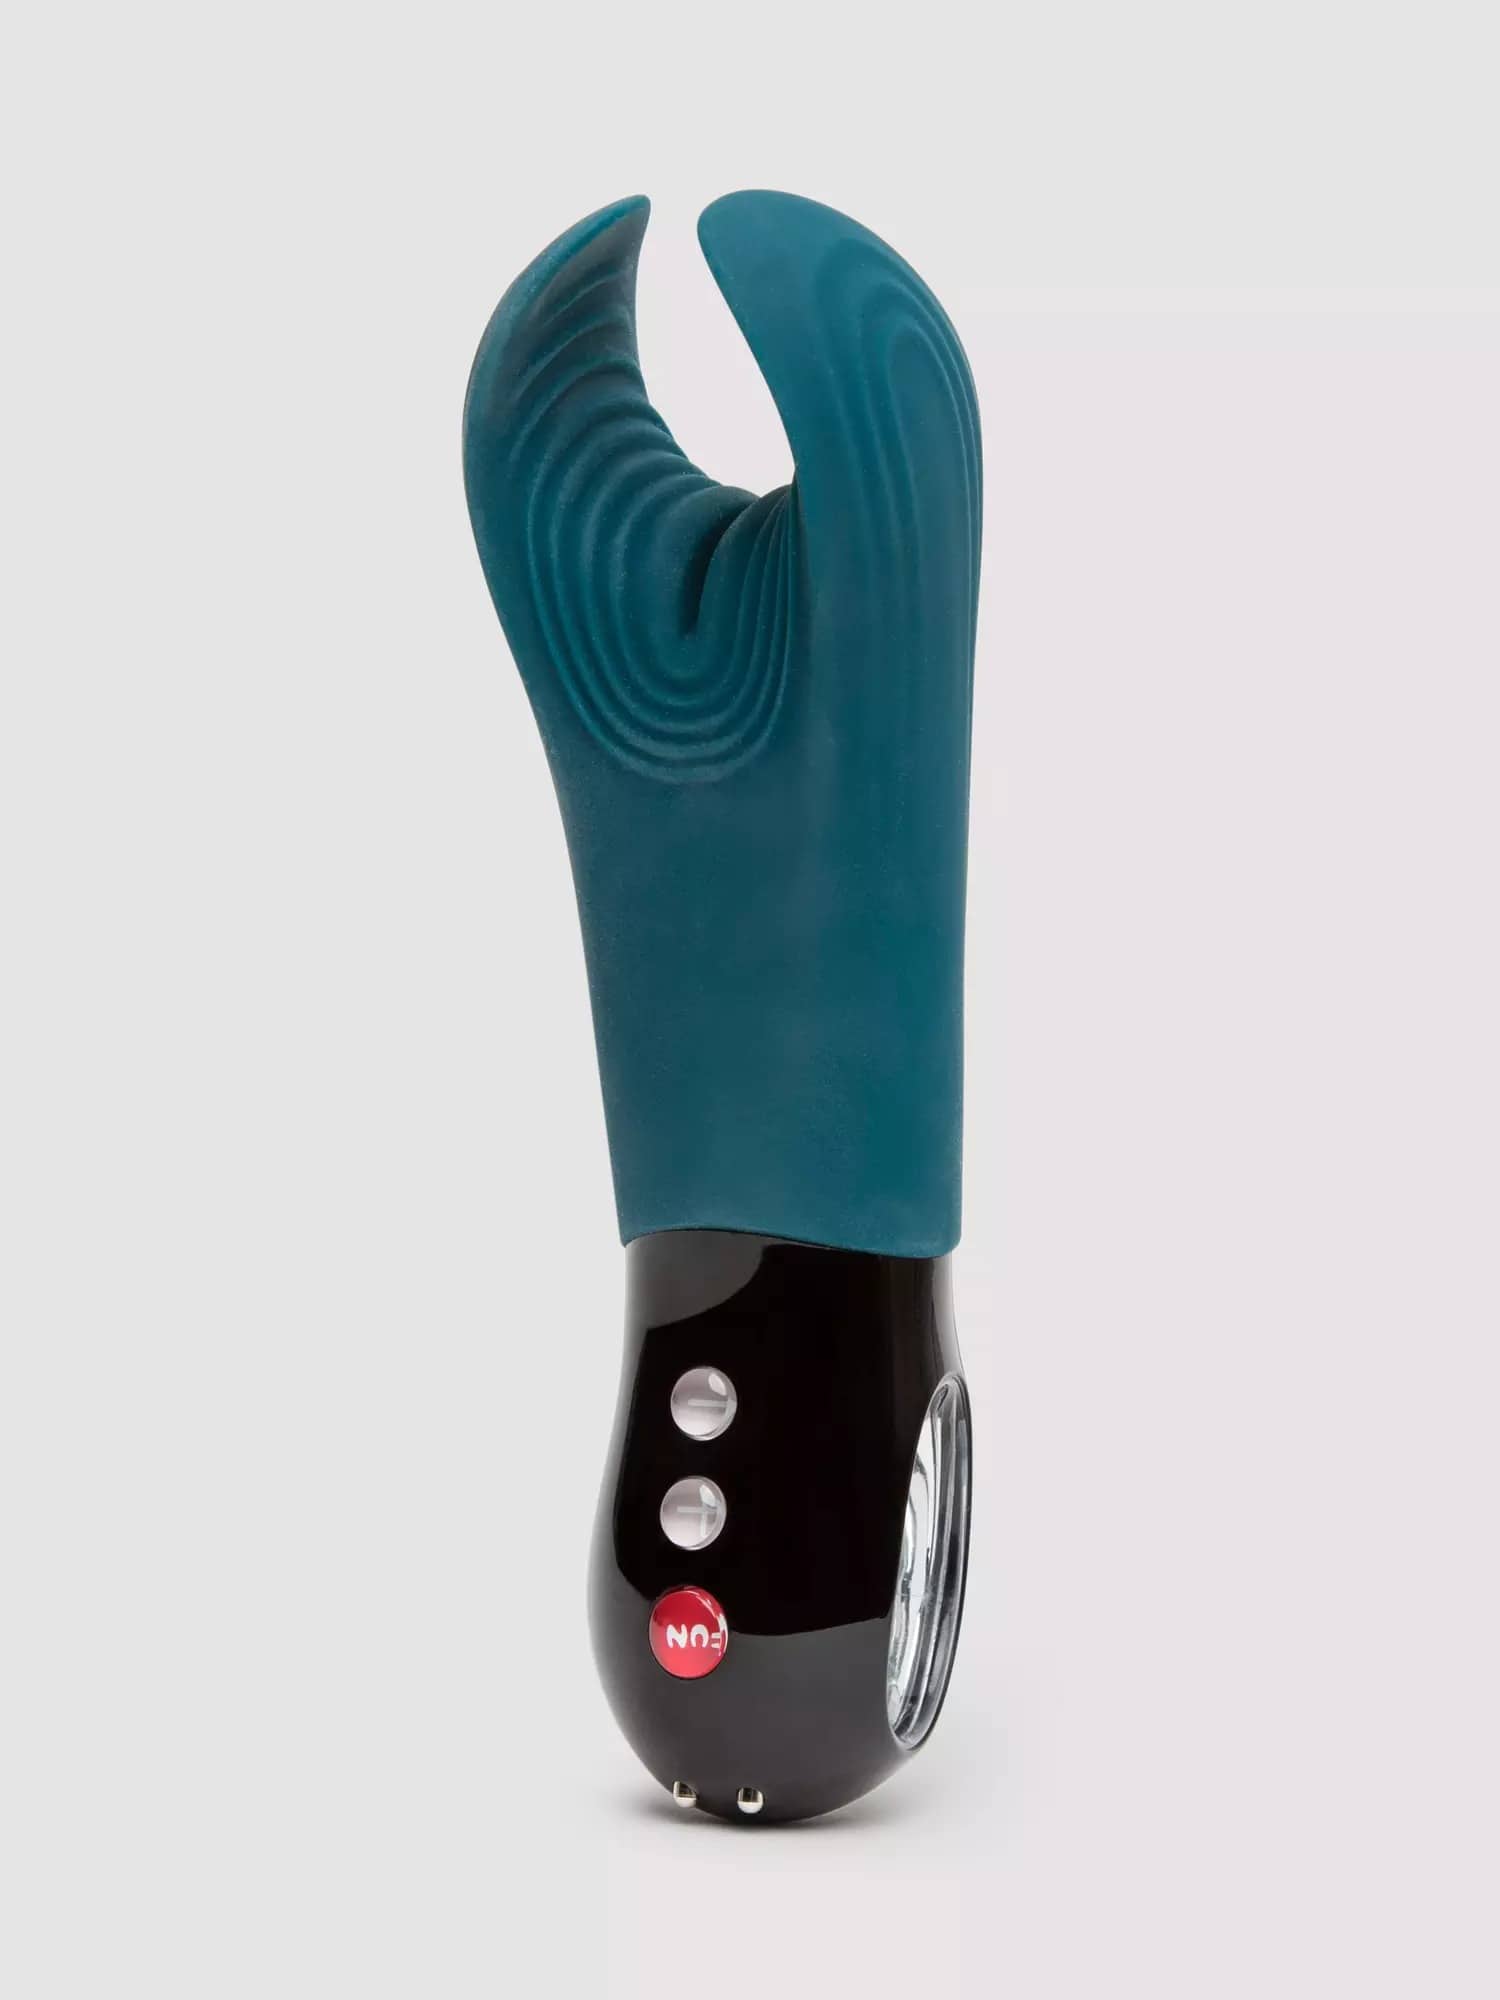 Fun Factory Manta Rechargeable Blue Vibrating Male Stroker. Slide 11